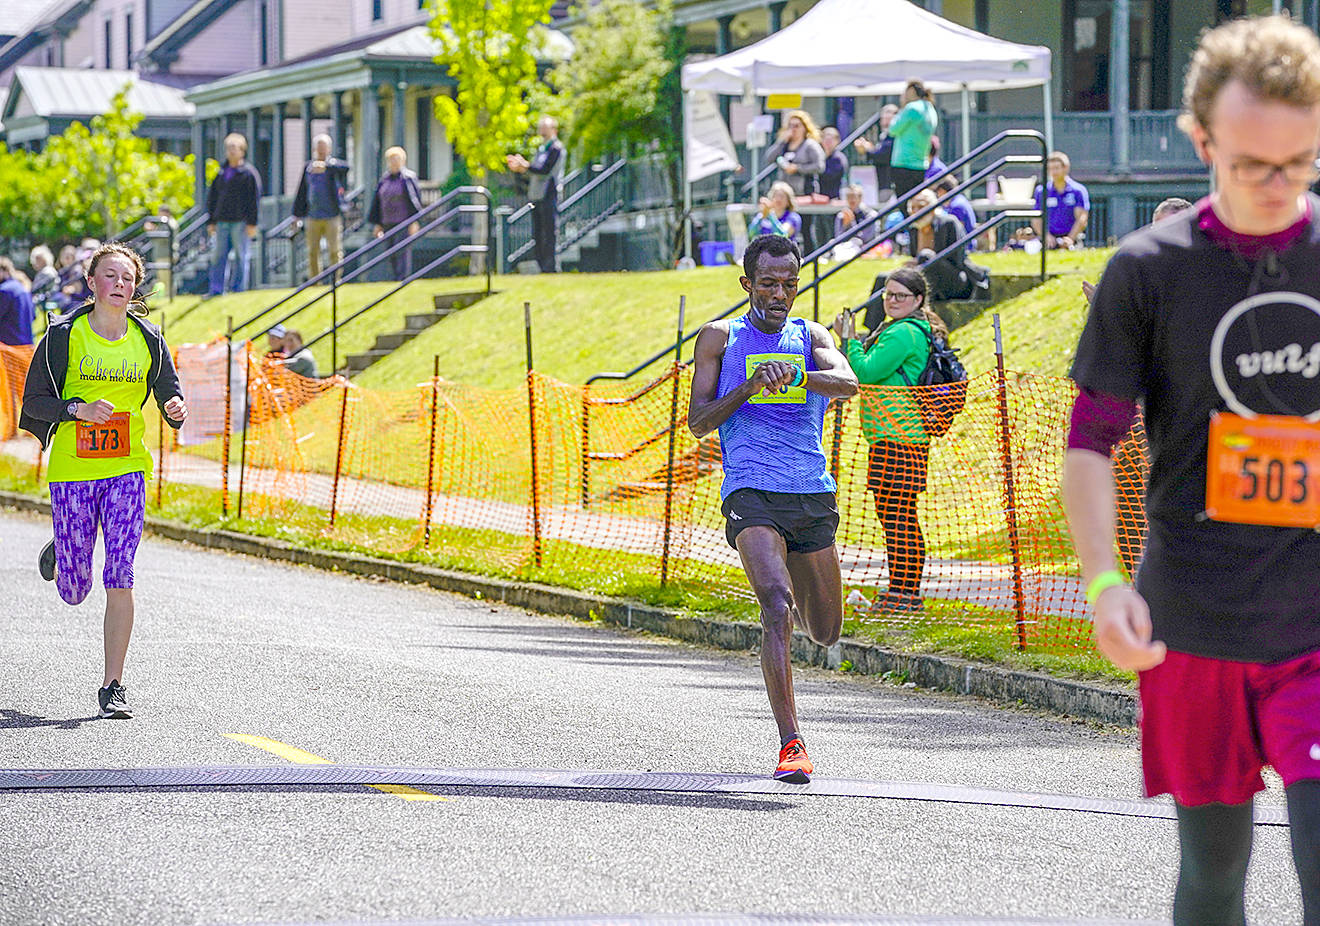 Taye Babeker Tirfea, from Addis Ababa, Ethiopa, stops his watch ase he crosses the line in 37:37 to win the Men’s Elite 2019 Rhody Run at Fort Worden State Park on Sunday. (Steve Mullensky/for Peninsula Daily News)